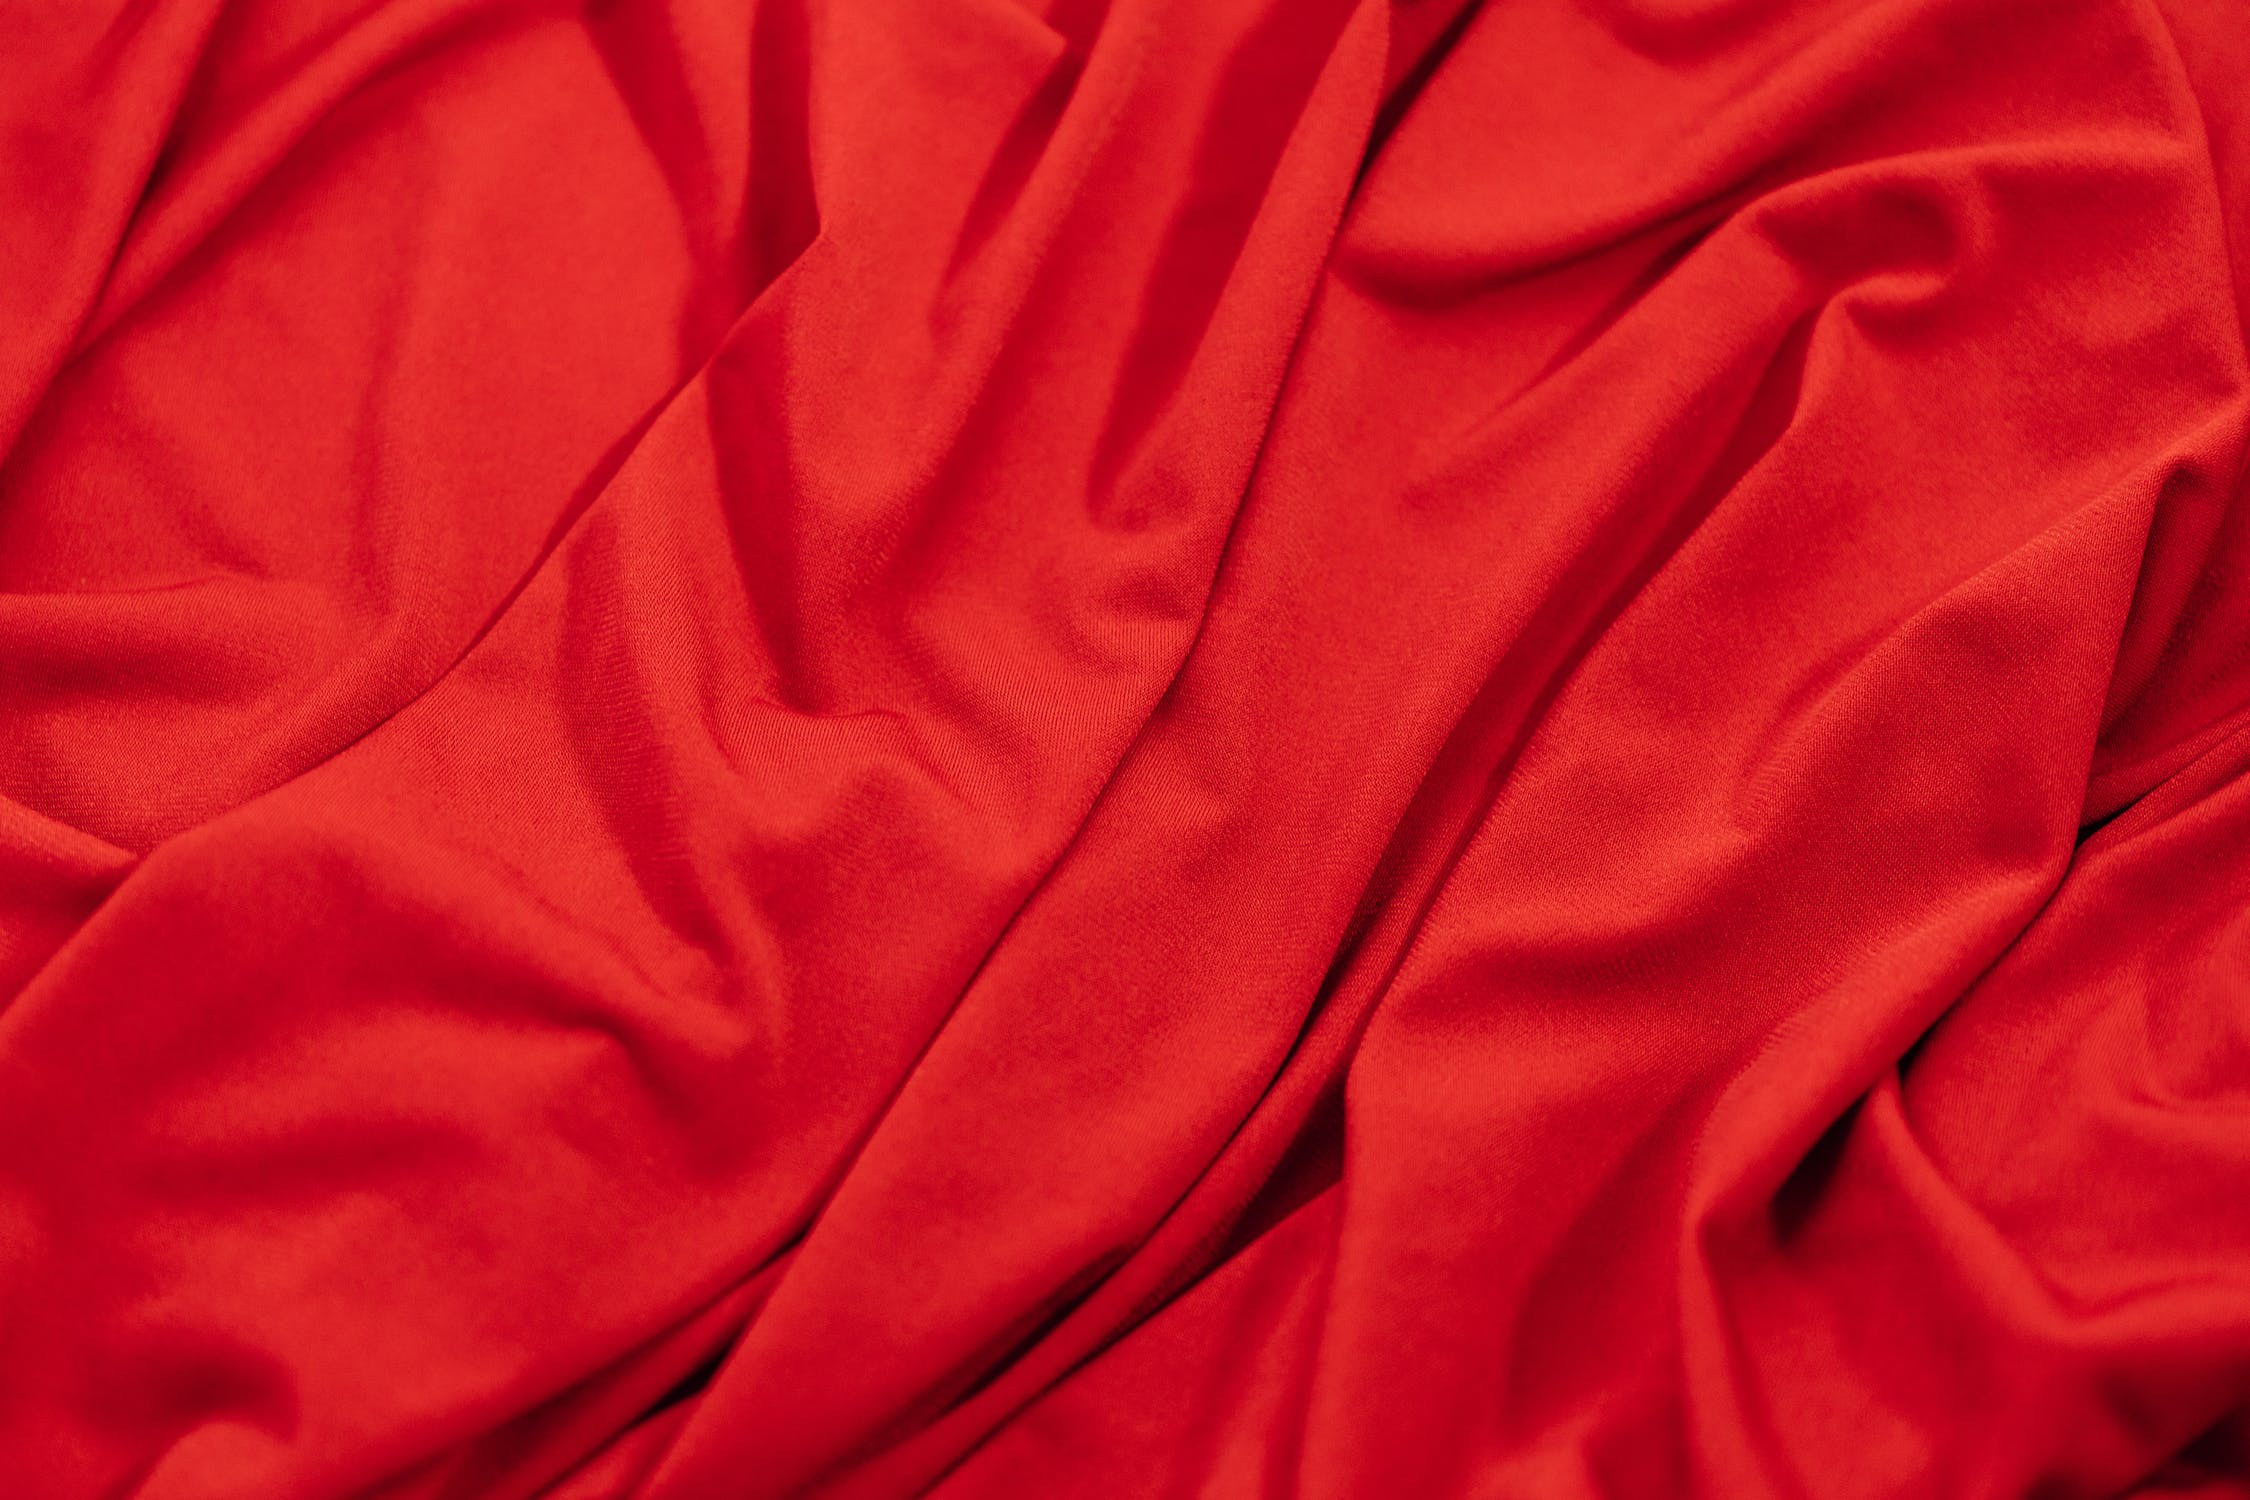 How To Care For Rayon Fabric: Here's Everything You Need To Know